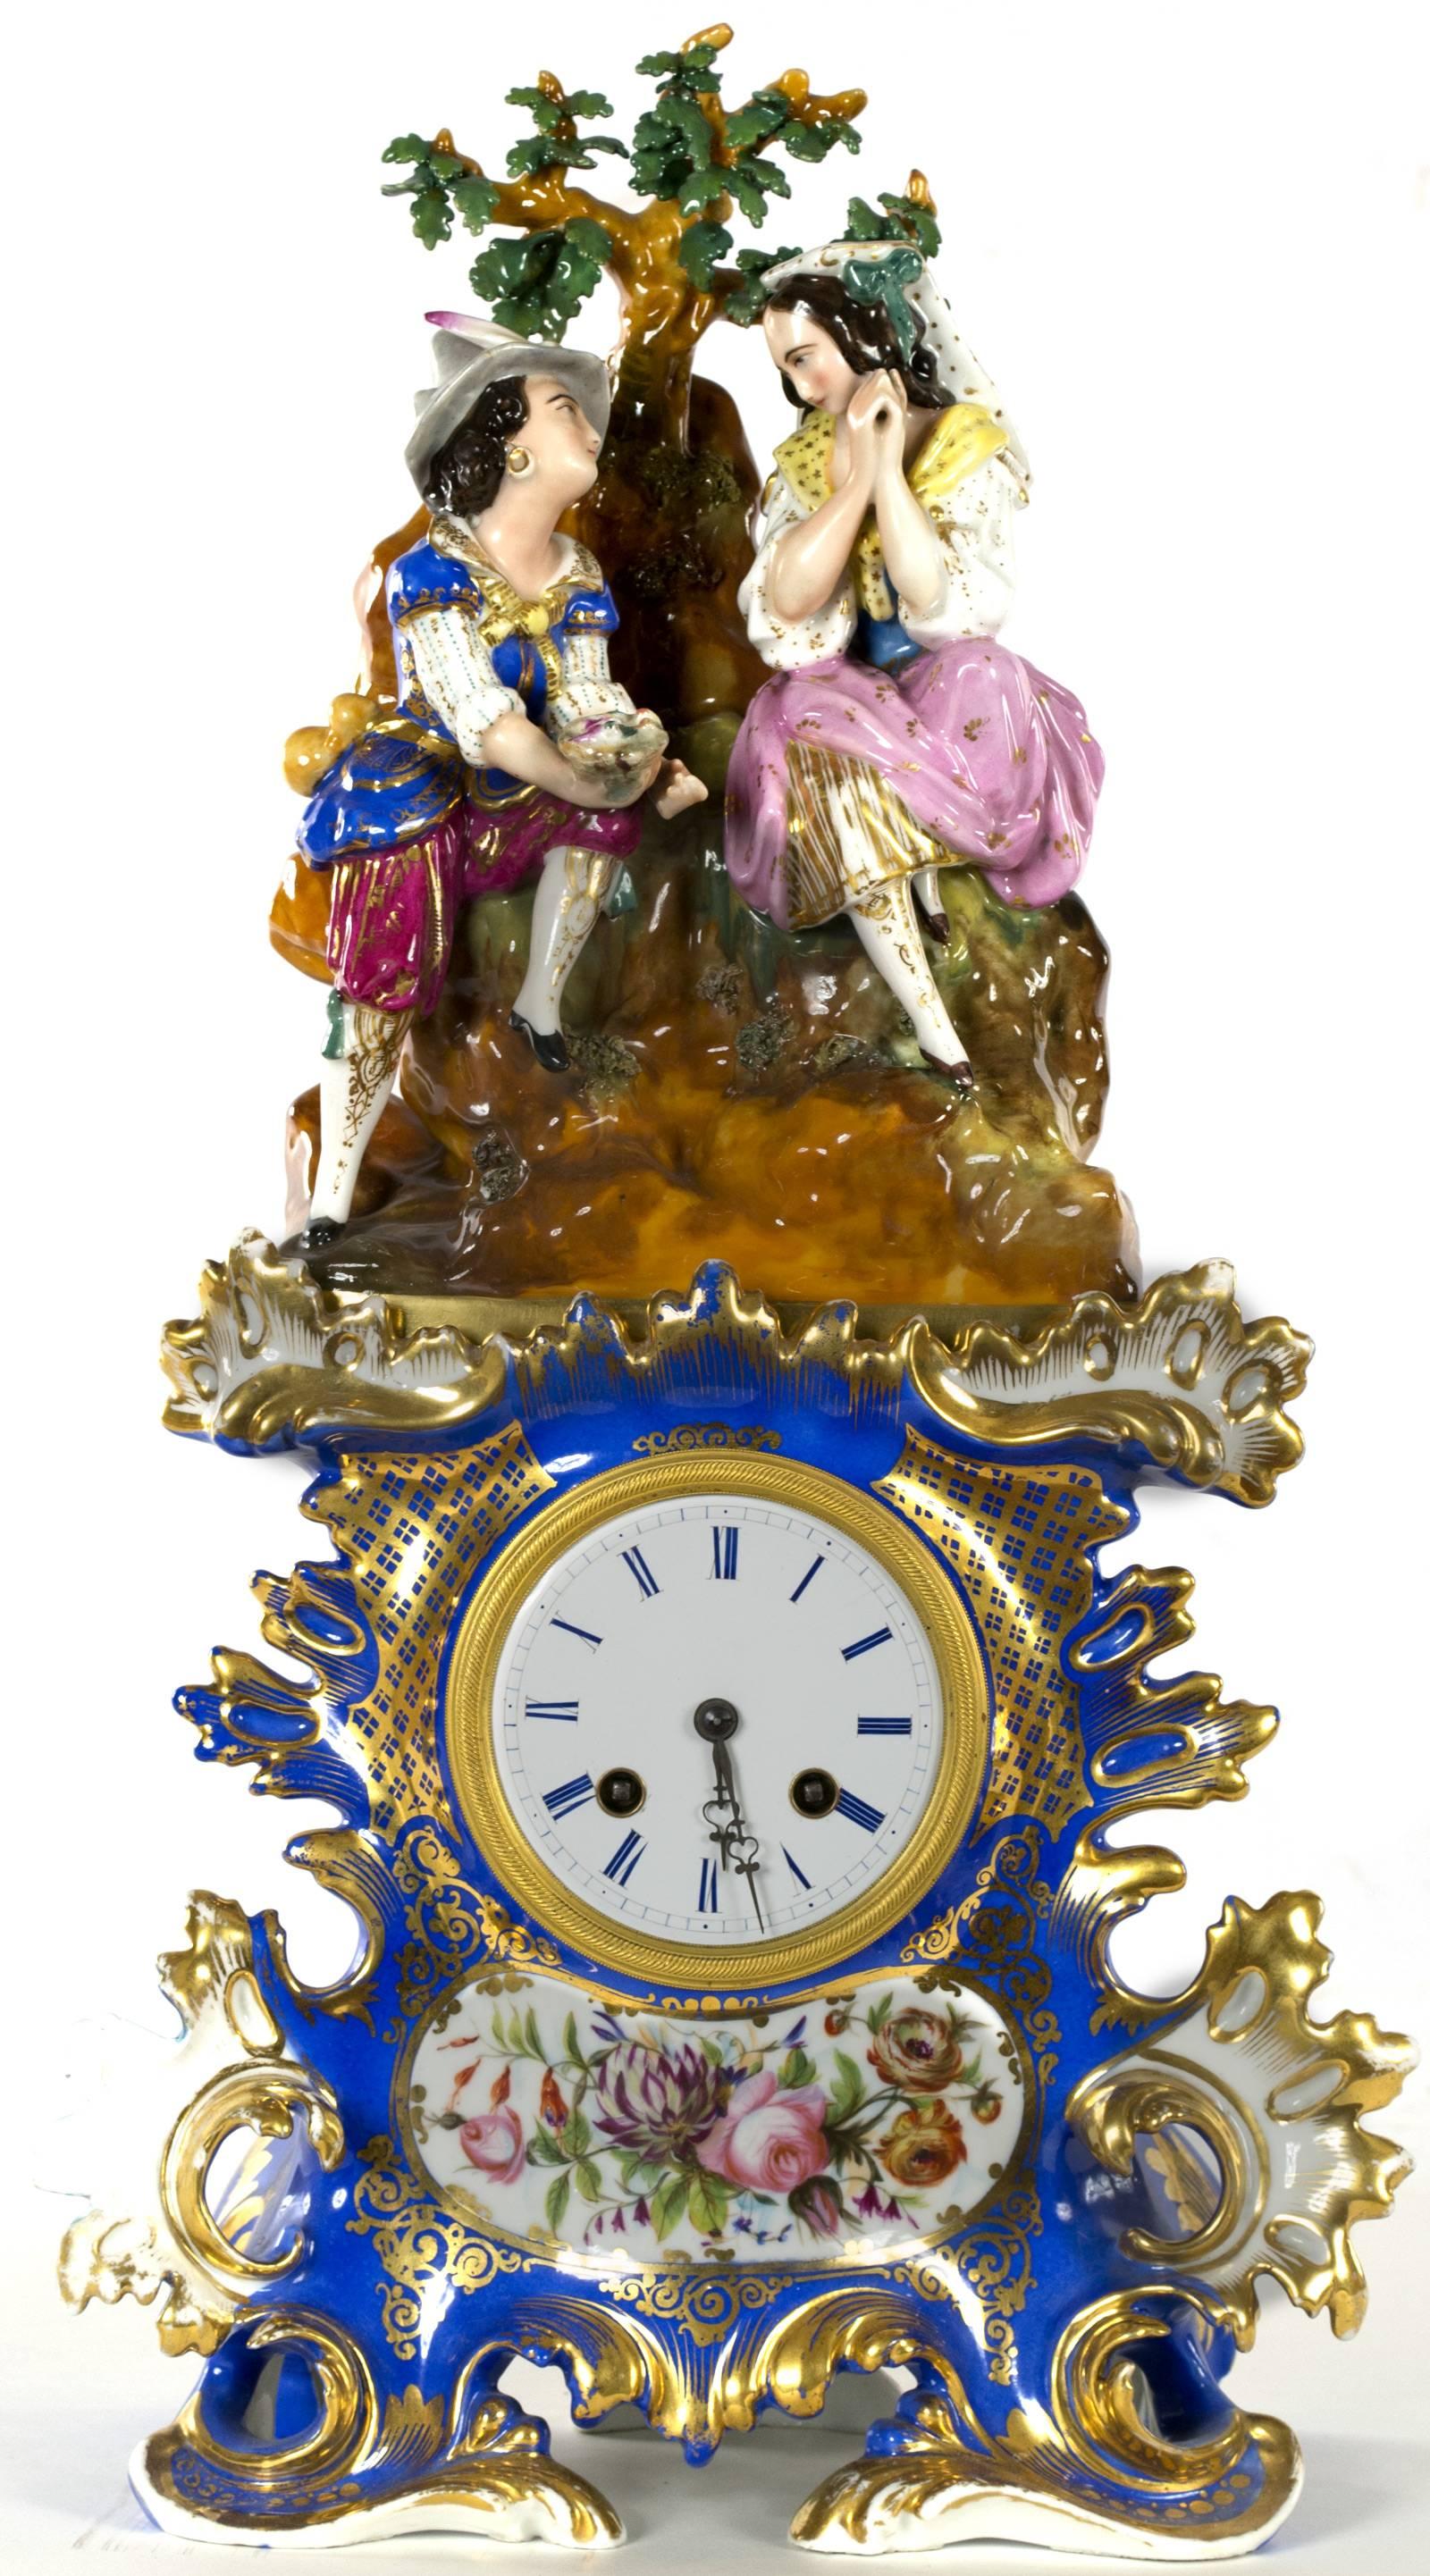 A two piece Old Paris porcelain clock. The top half features a figurative group of a romantic couple, courting one another beneath the branches of a tree. The bottom half houses the clock gilt and painted with bright colors. Made in France during